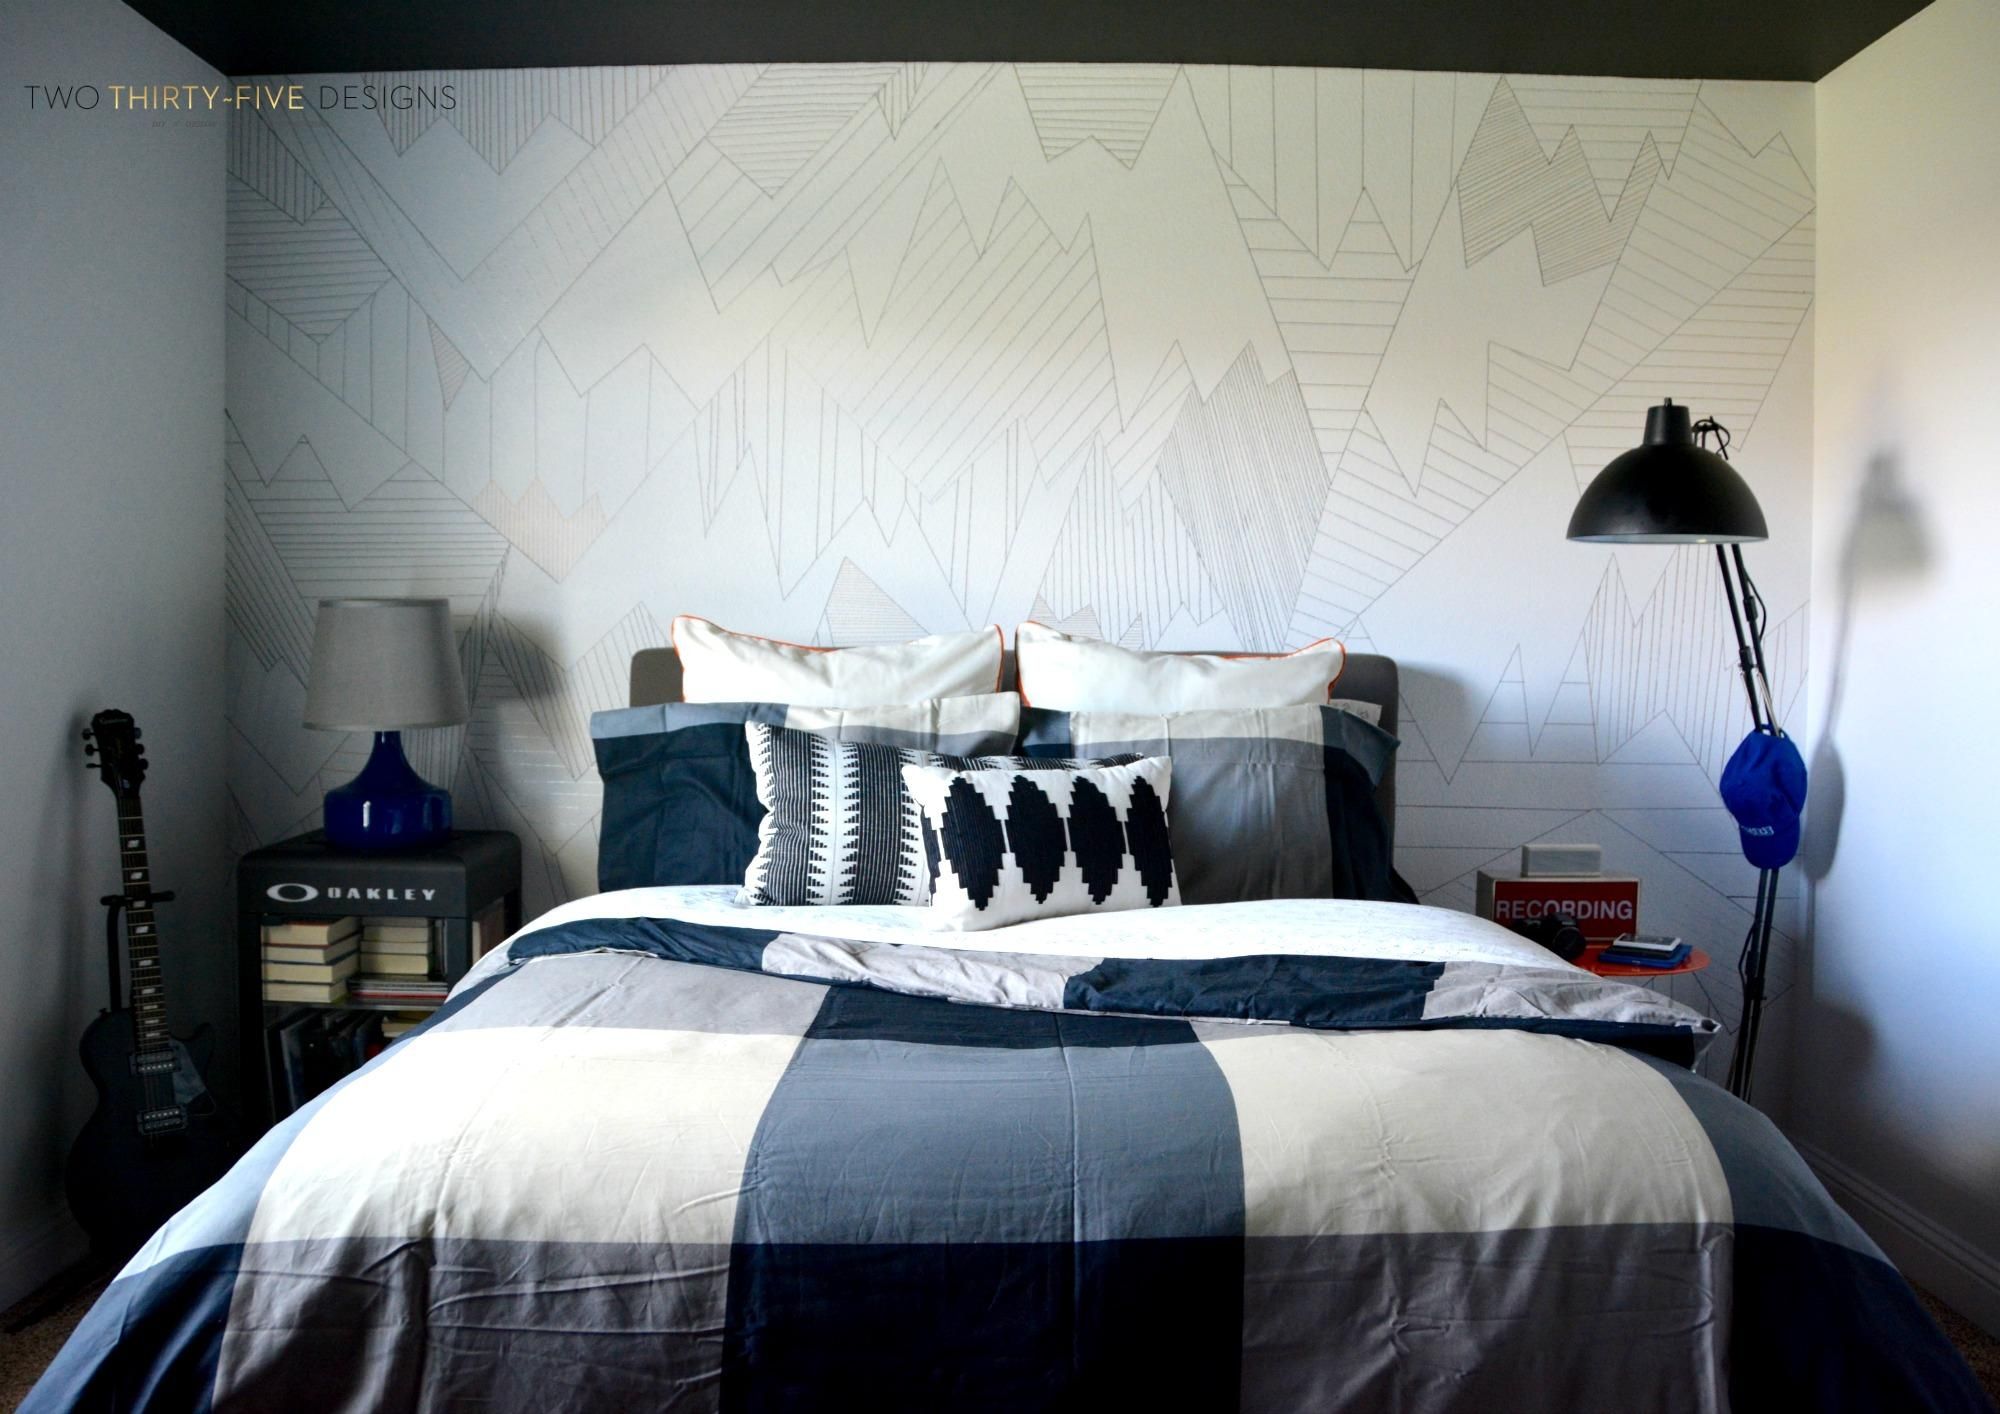 Wall Treatments That Are Not Shiplap – Two Thirty Five Designs Regarding Sharpie Wall Art (View 13 of 20)